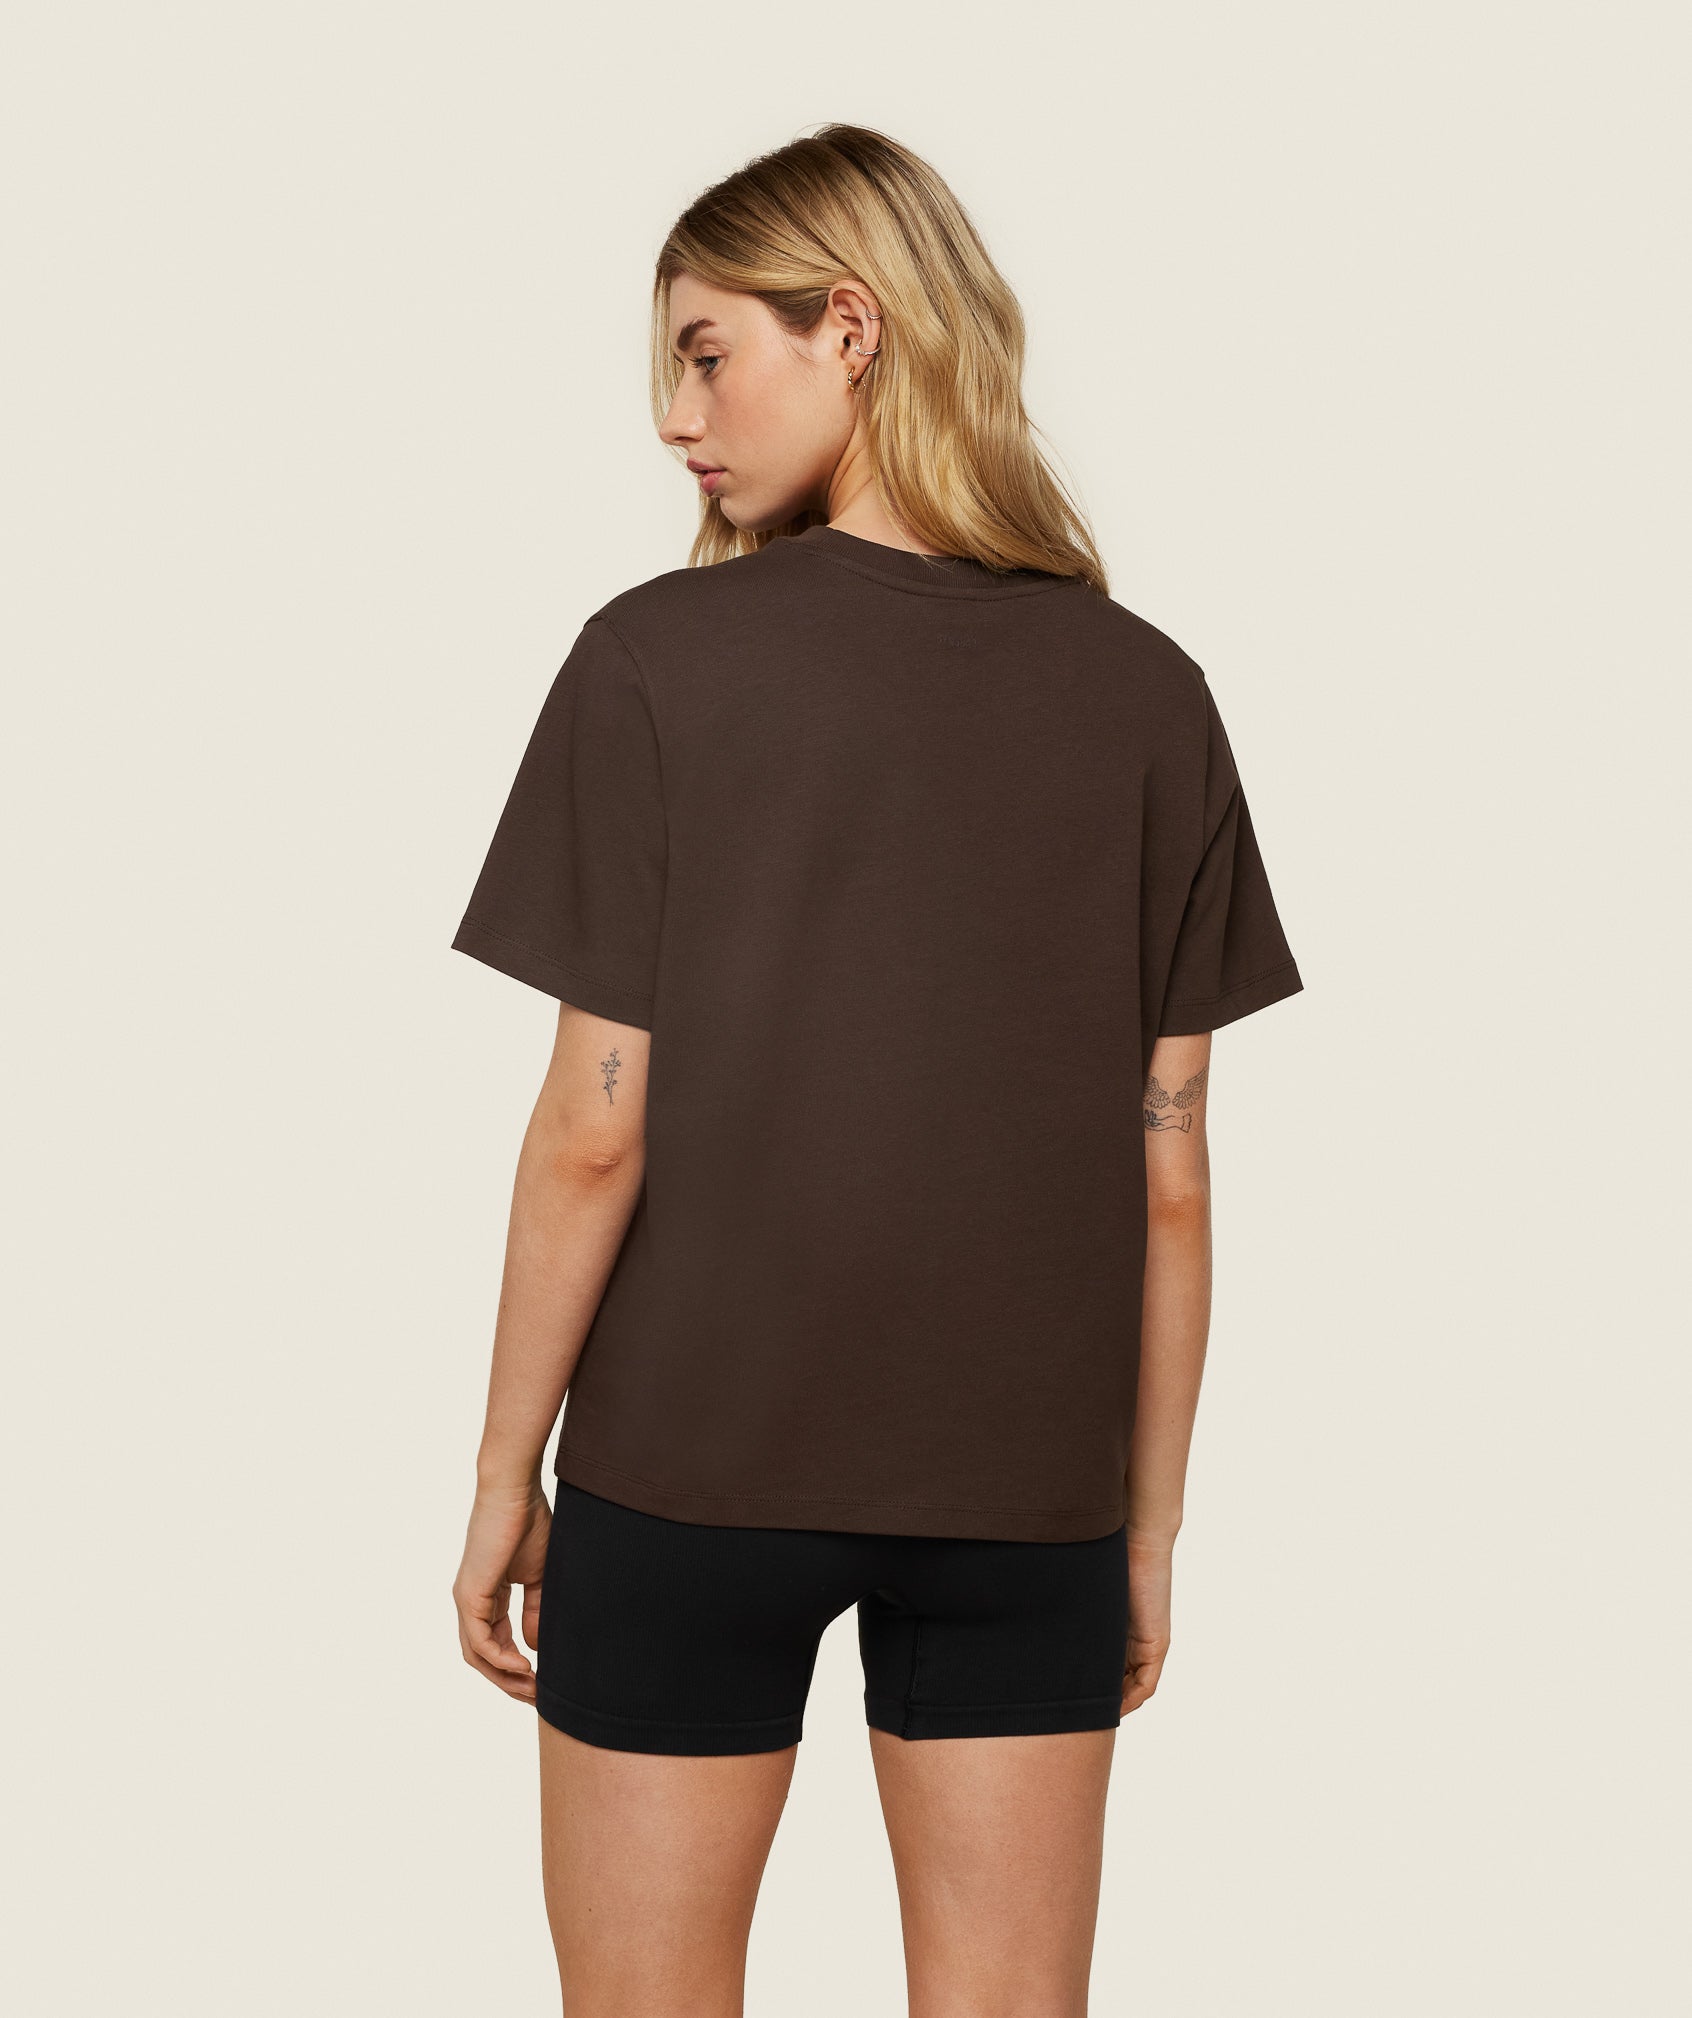 Phys Ed Graphic T-Shirt in Archive Brown - view 4